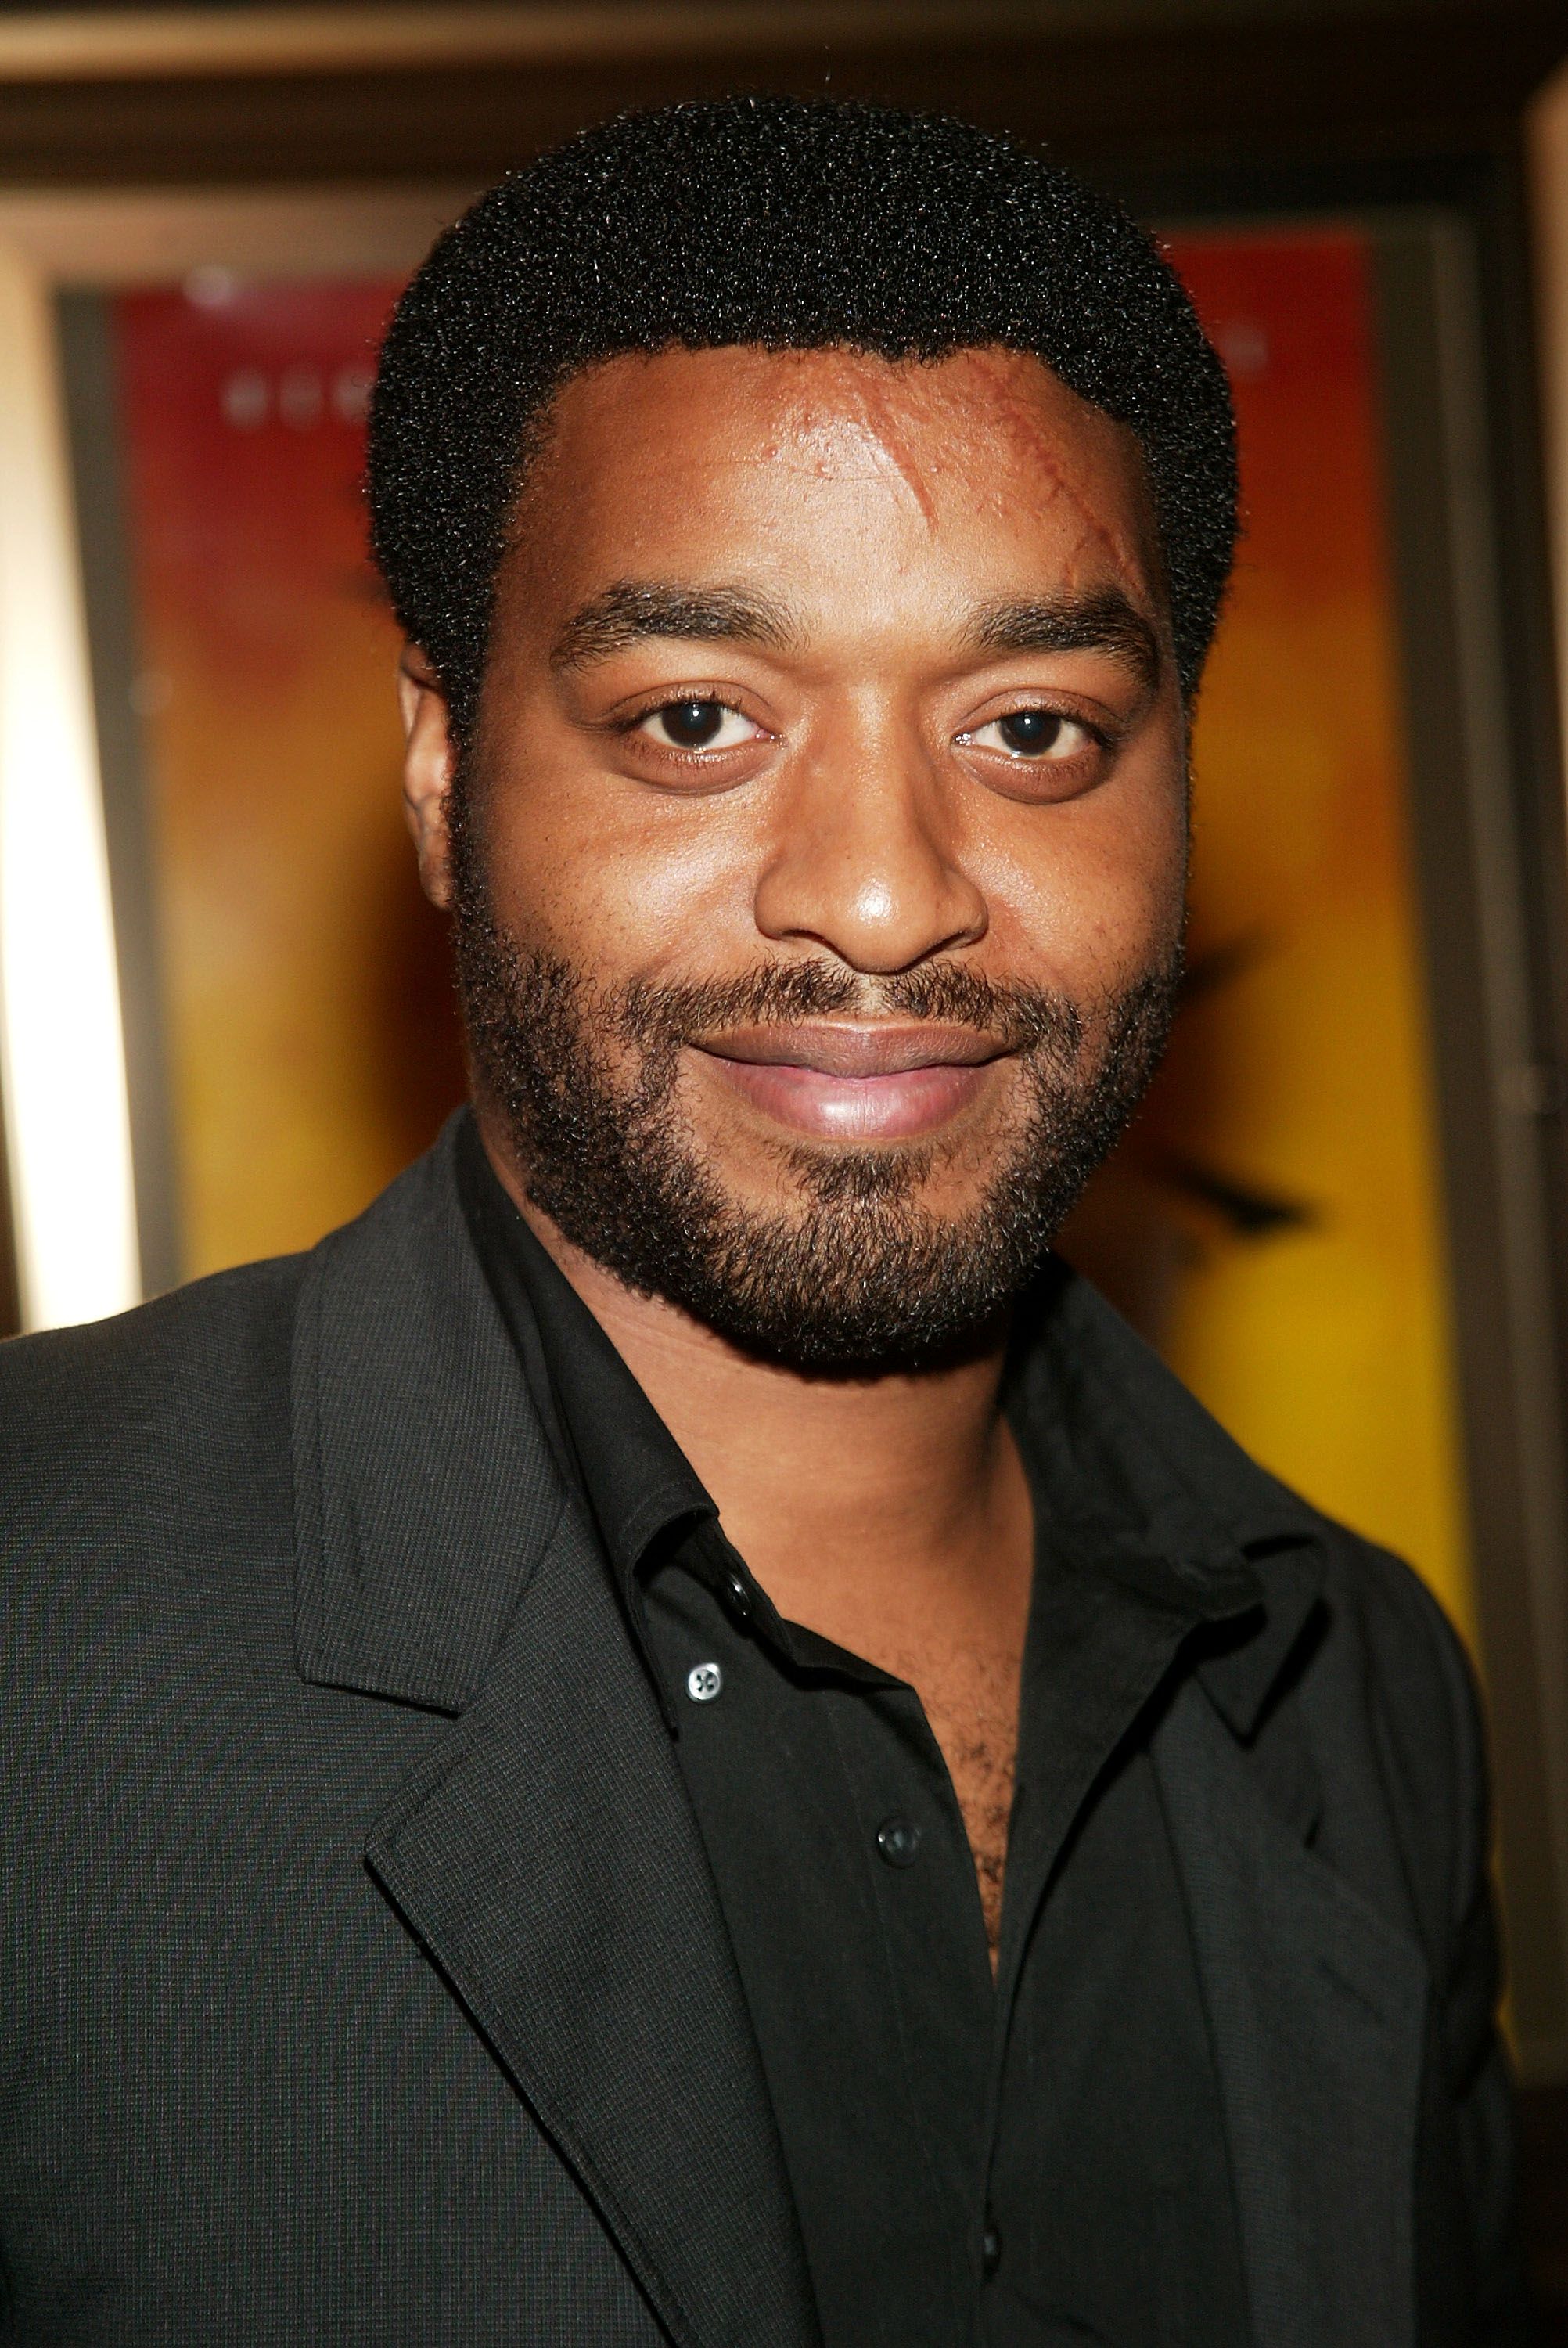 Actor Chiwetel Ejiofor at the New York premiere of Quentin Tarantino's "Kill Bill Vol. 1" at the Ziegfeld Theater October 7, 2003 in New York. | Photo: Getty Images